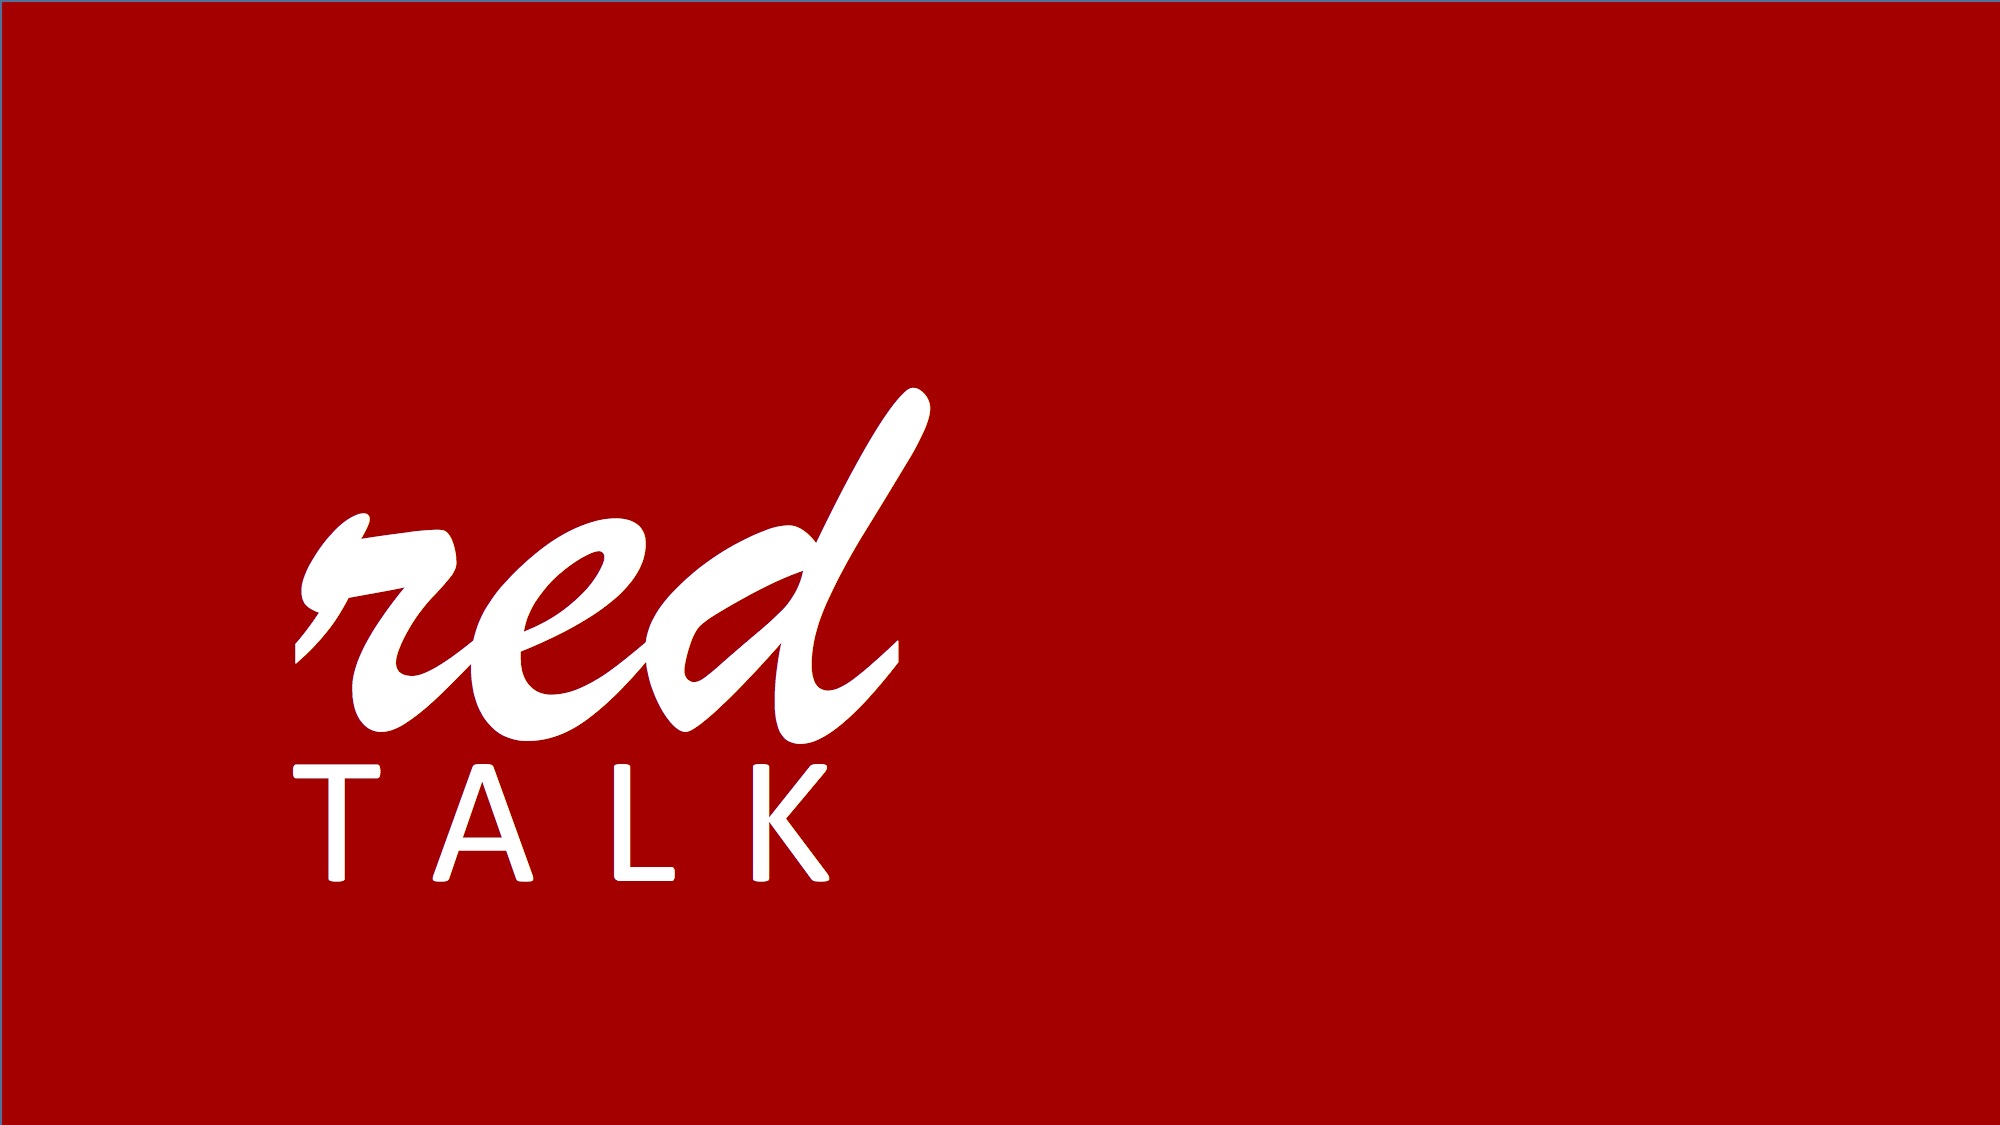 Spring RED Talk set for 7 to 8 p.m. Feb. 16 at Love Library North. 